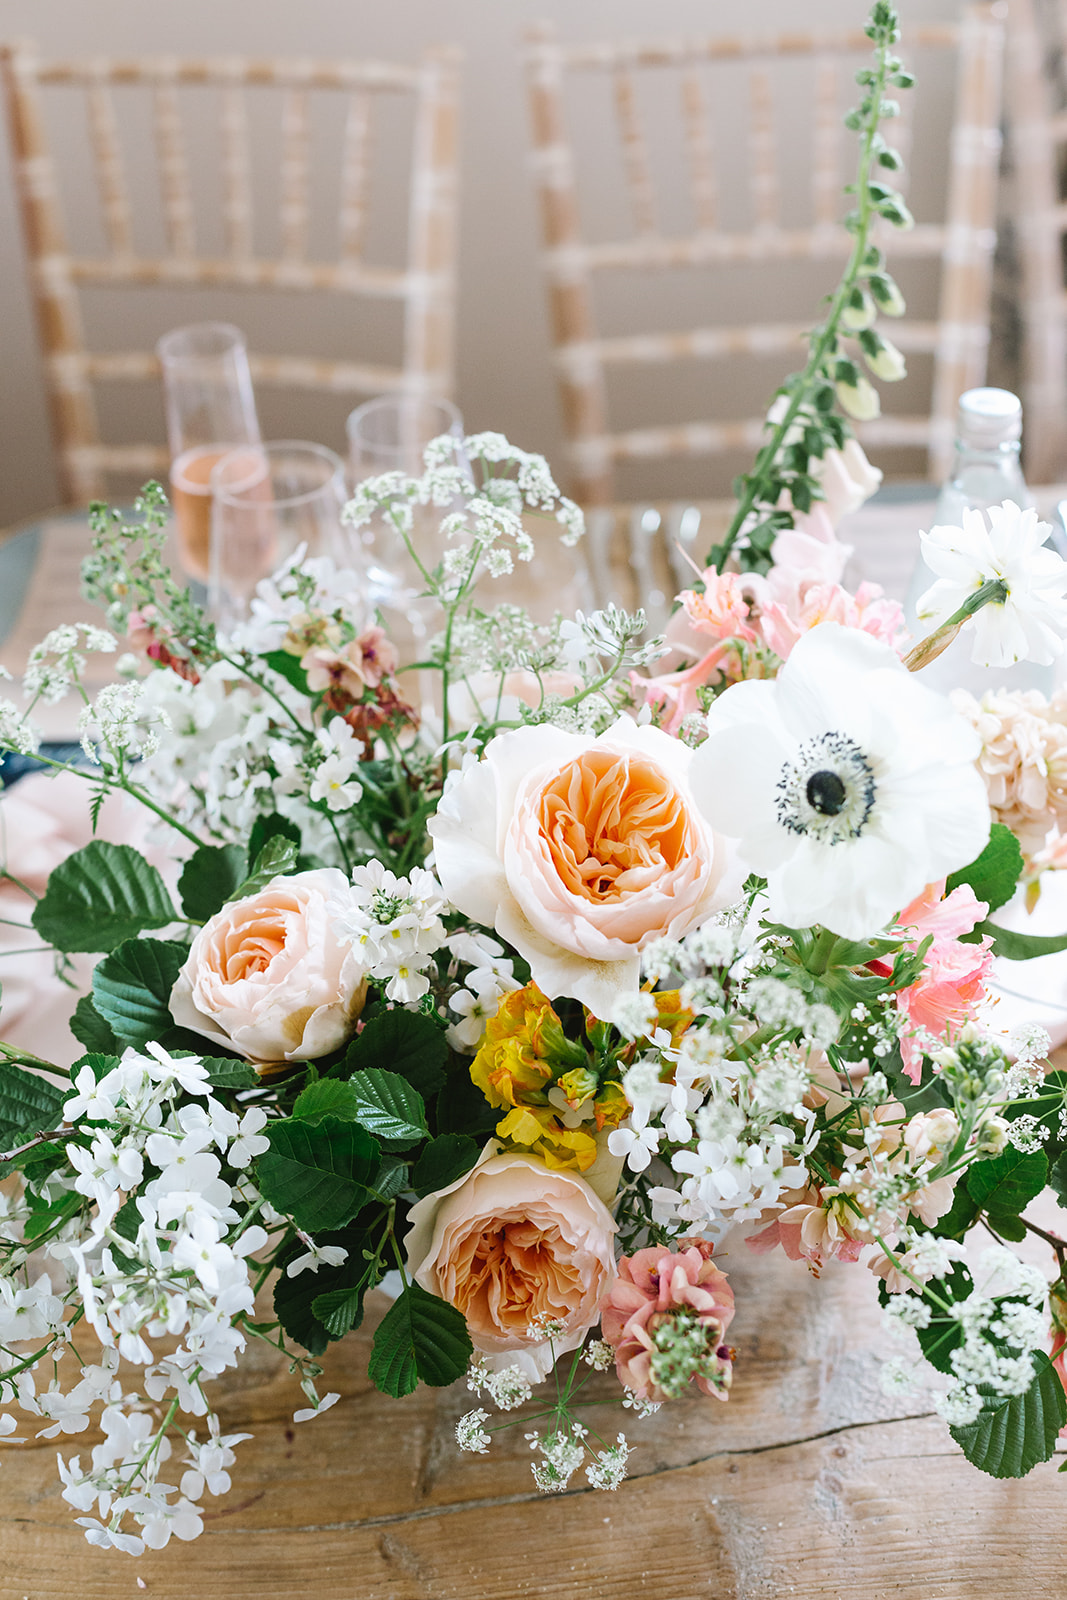 Blush wedding flowers at Boconnoc House in May